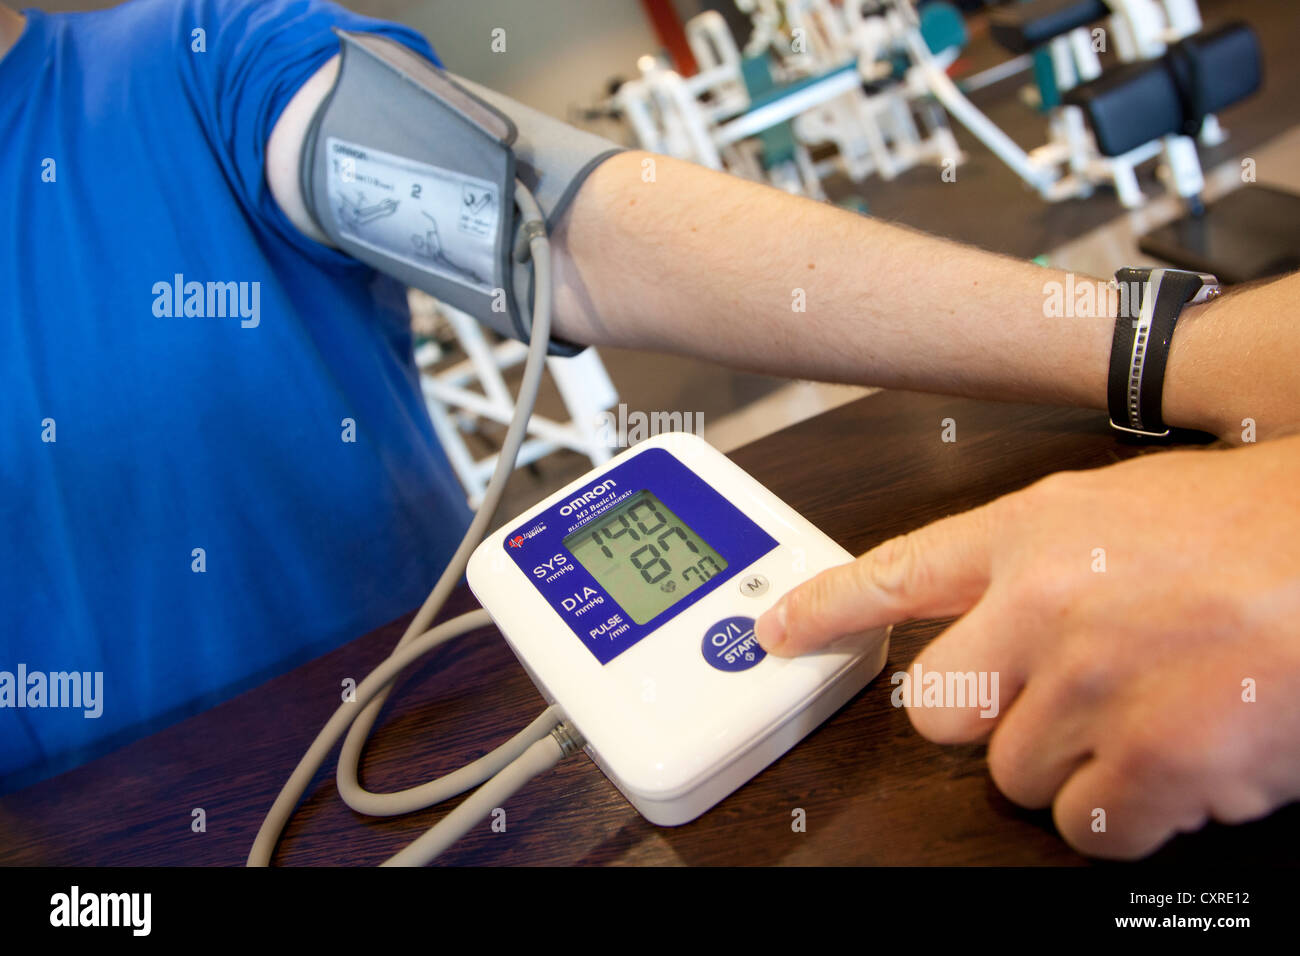 Heart rate monitor, blood pressure measurement, prior to a workout at the fitness centre, Regensburg, Bavaria, Germany, Europe Stock Photo